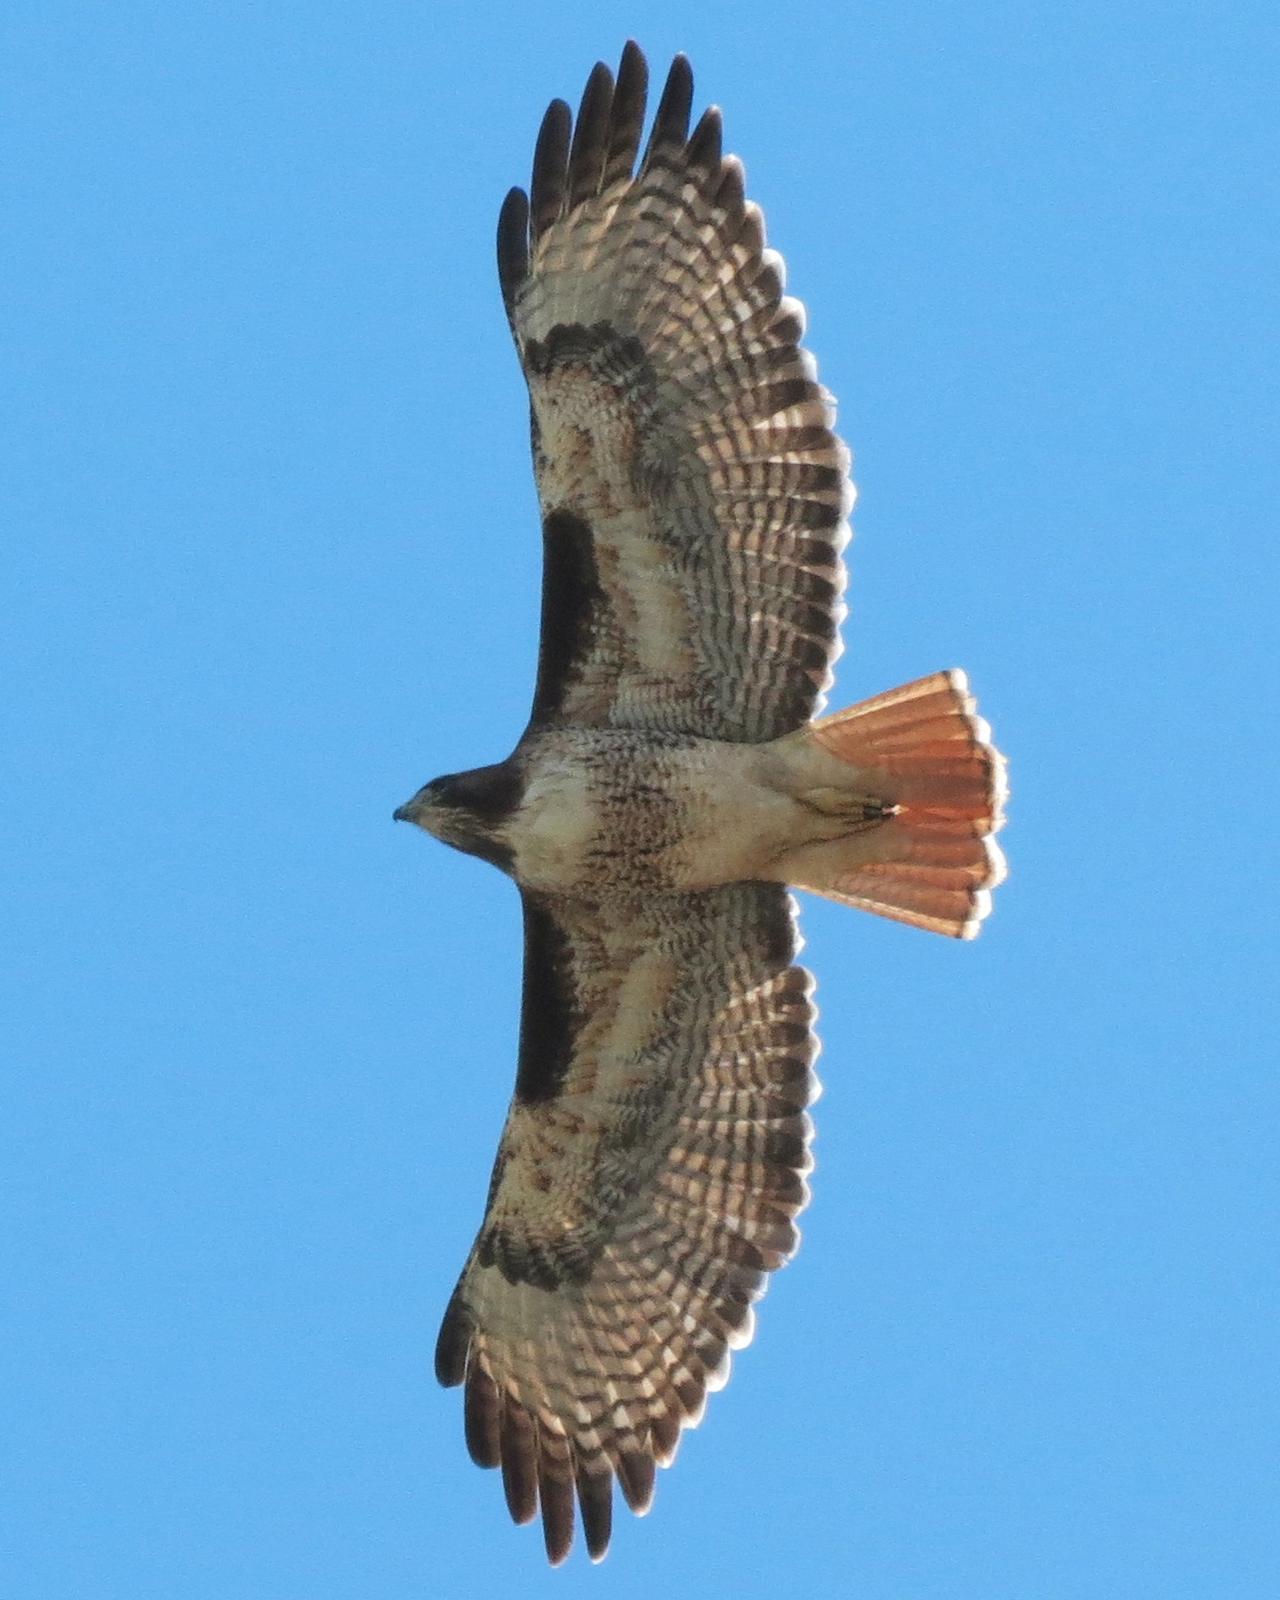 Red-tailed Hawk Photo by David Bell